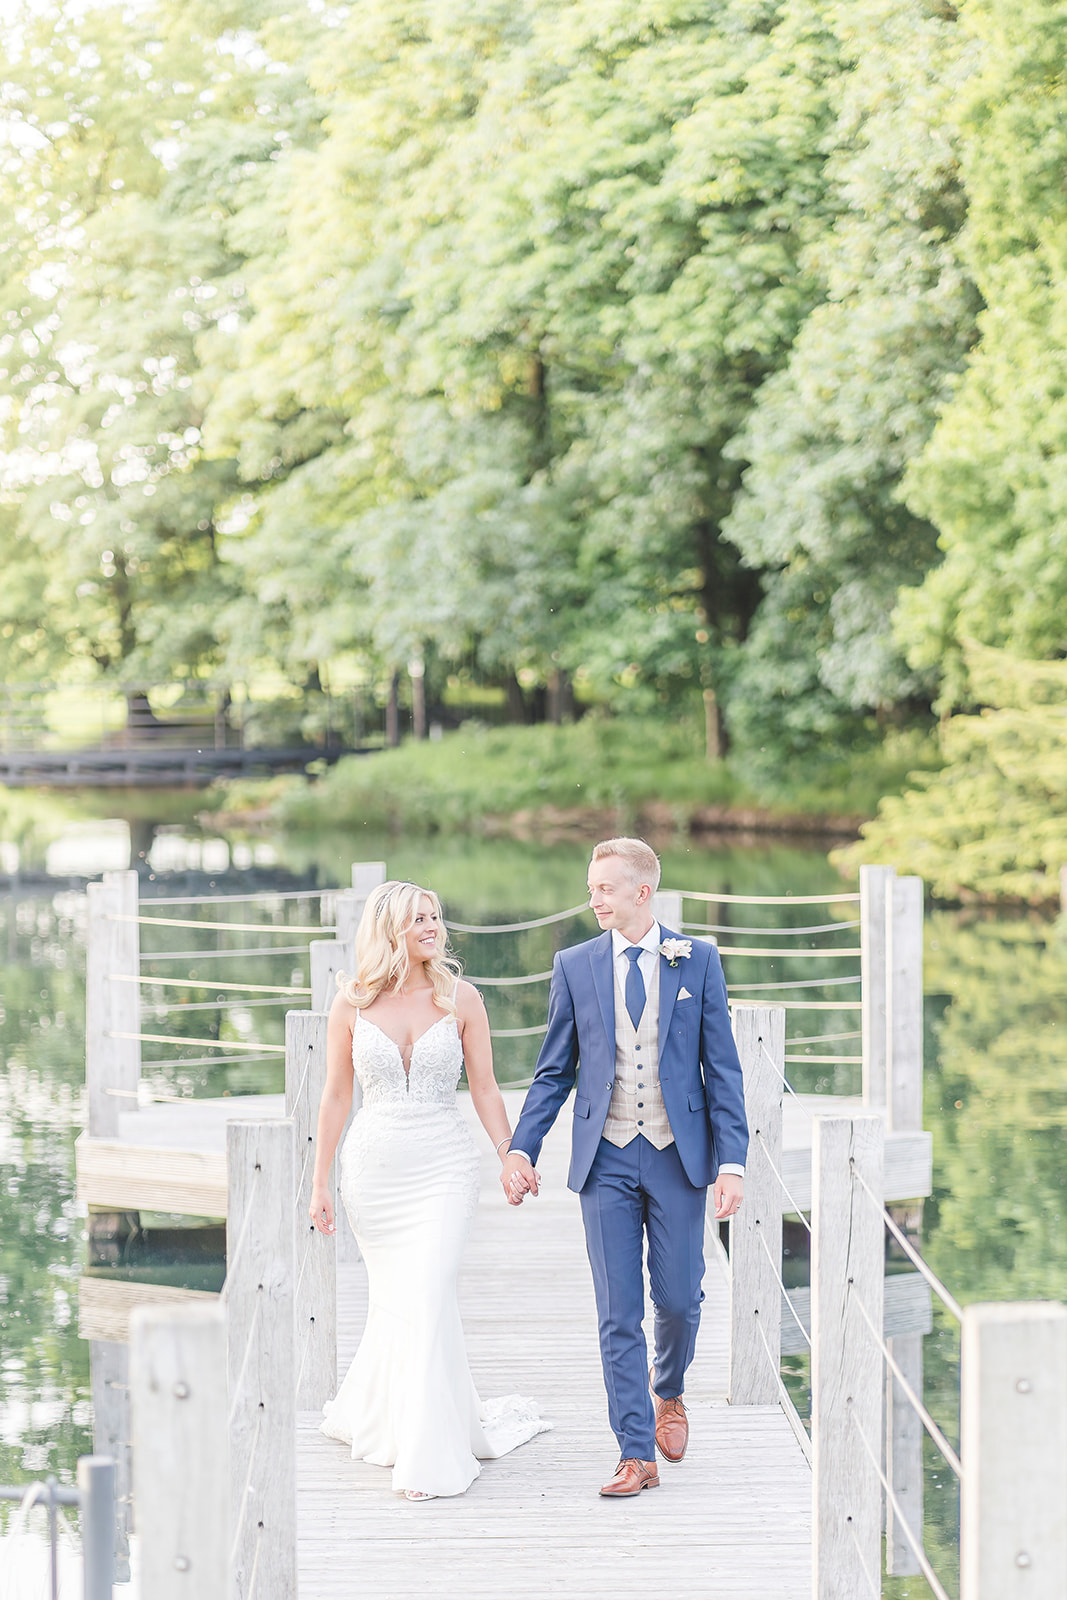 light airy Cheshire weddings at Merrydale Manor